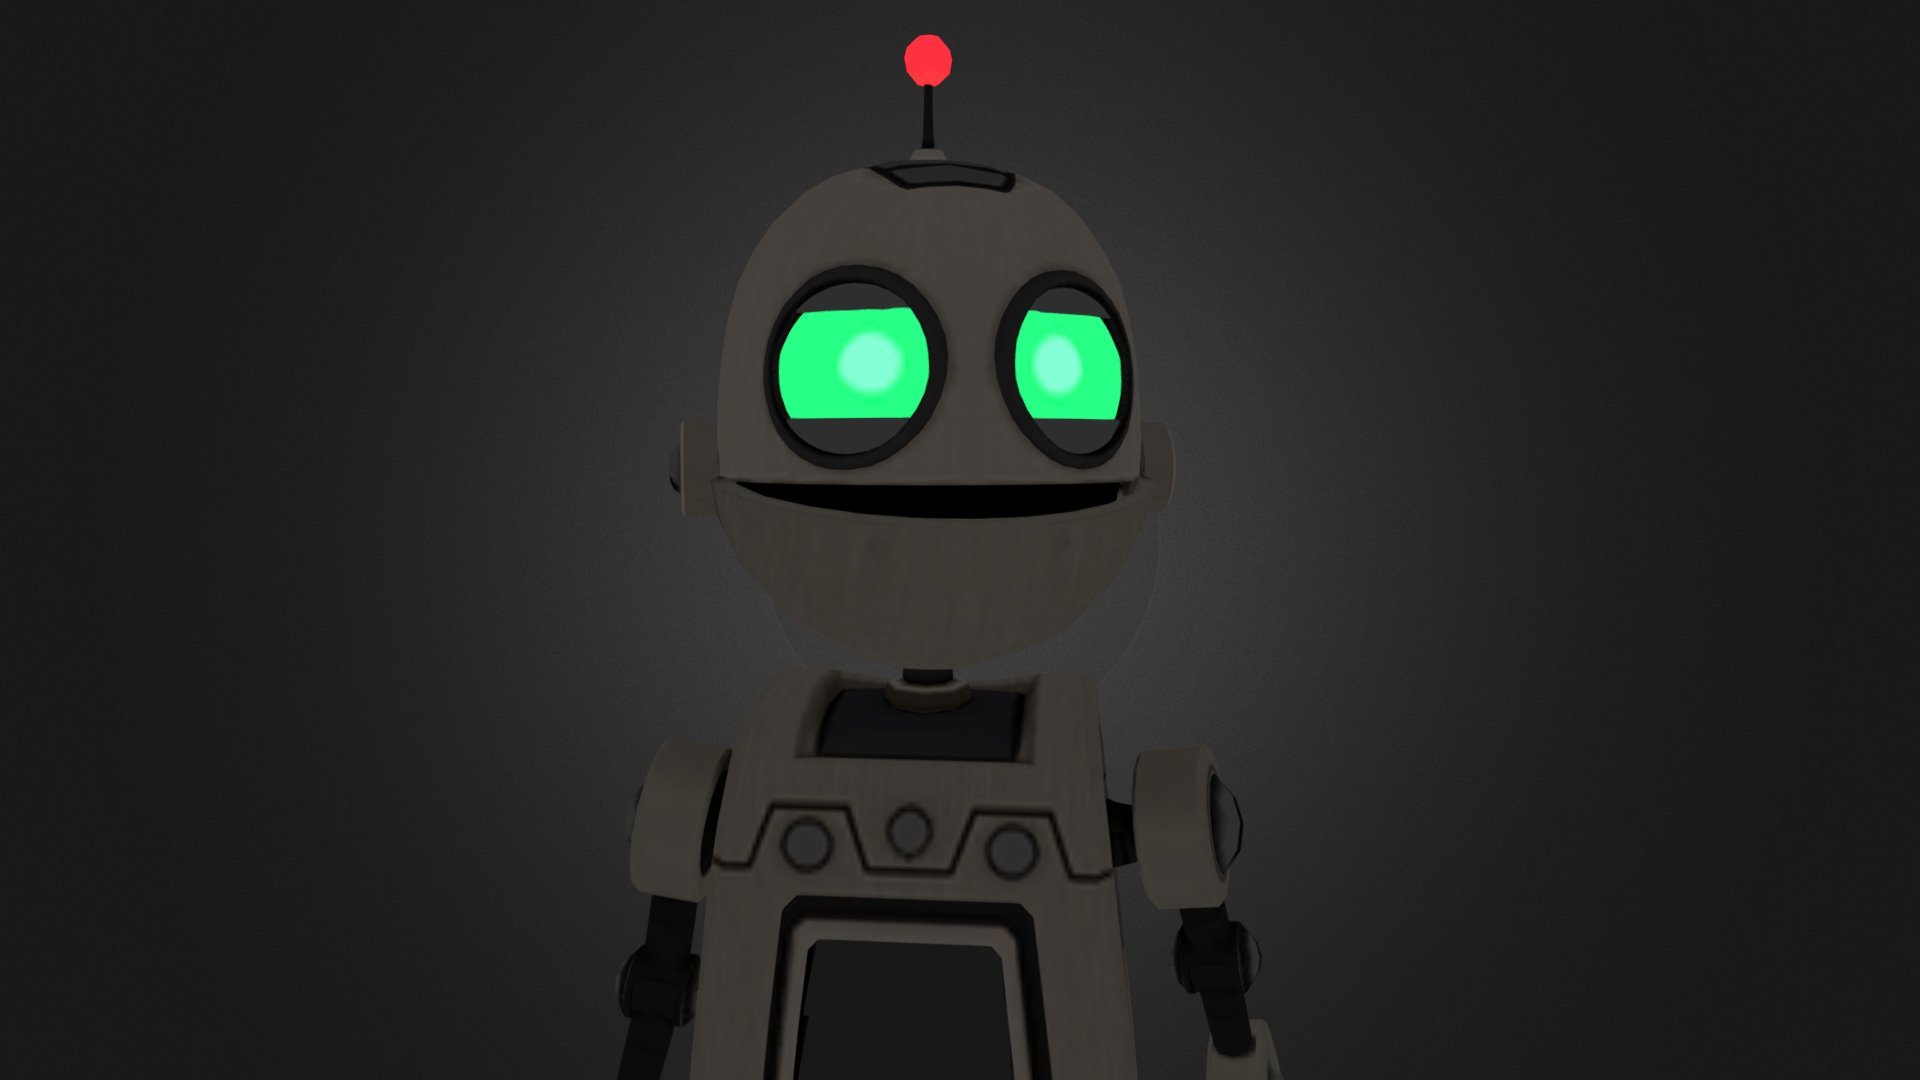 Original skin mesh from models resource.com
PS3 Clank from Ratchet and Clank a Crack in Time

VR Chat optimized, occulus quest friendly

Rigged it myself :) Eyes can blink (shape key requires animating in unity)

*VR Chat users
I would be delighted if you send screenshots to my discord server https://discord.gg/Vk8UFgn - Clank - Download Free 3D model by Dandelion (@dandelion4days) 3d model